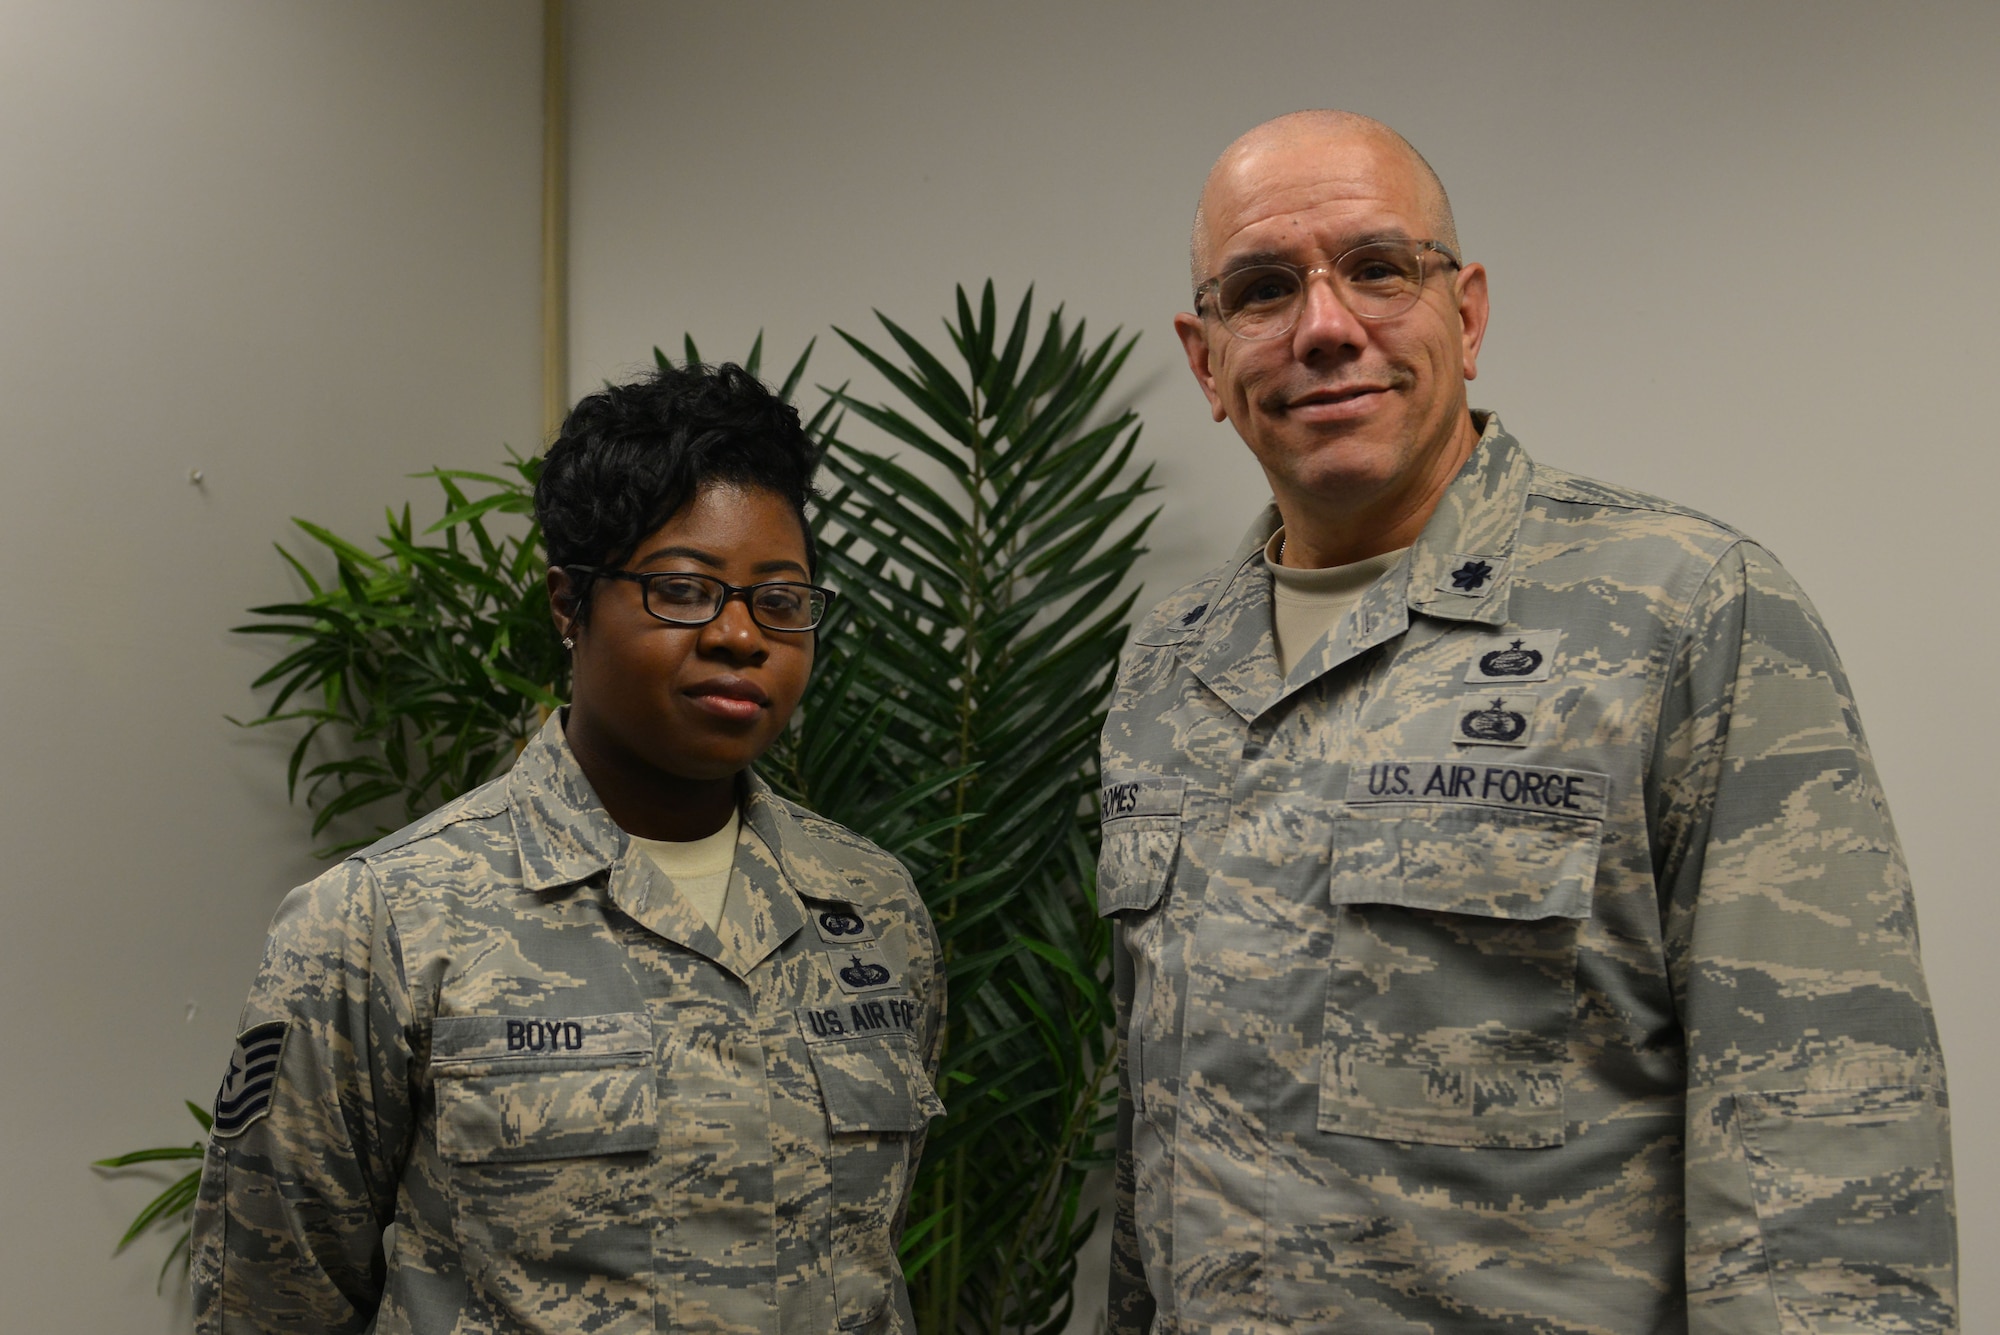 U.S. Air Force Staff Sgt. Jessyca Boyd, 20th Fighter Wing (FW) Equal Opportunity (EO) noncommissioned officer in charge, left, and Lt. Col. Donald M. Gomes, 20th FW EO director, stand for a picture at Shaw Air Force Base, S.C., May 3, 2017. The two Airmen are responsible for human relations education, mediation and helping to monitor unit climate via surveys. (U.S. Air Force photo by Airman 1st Class Destinee Sweeney)